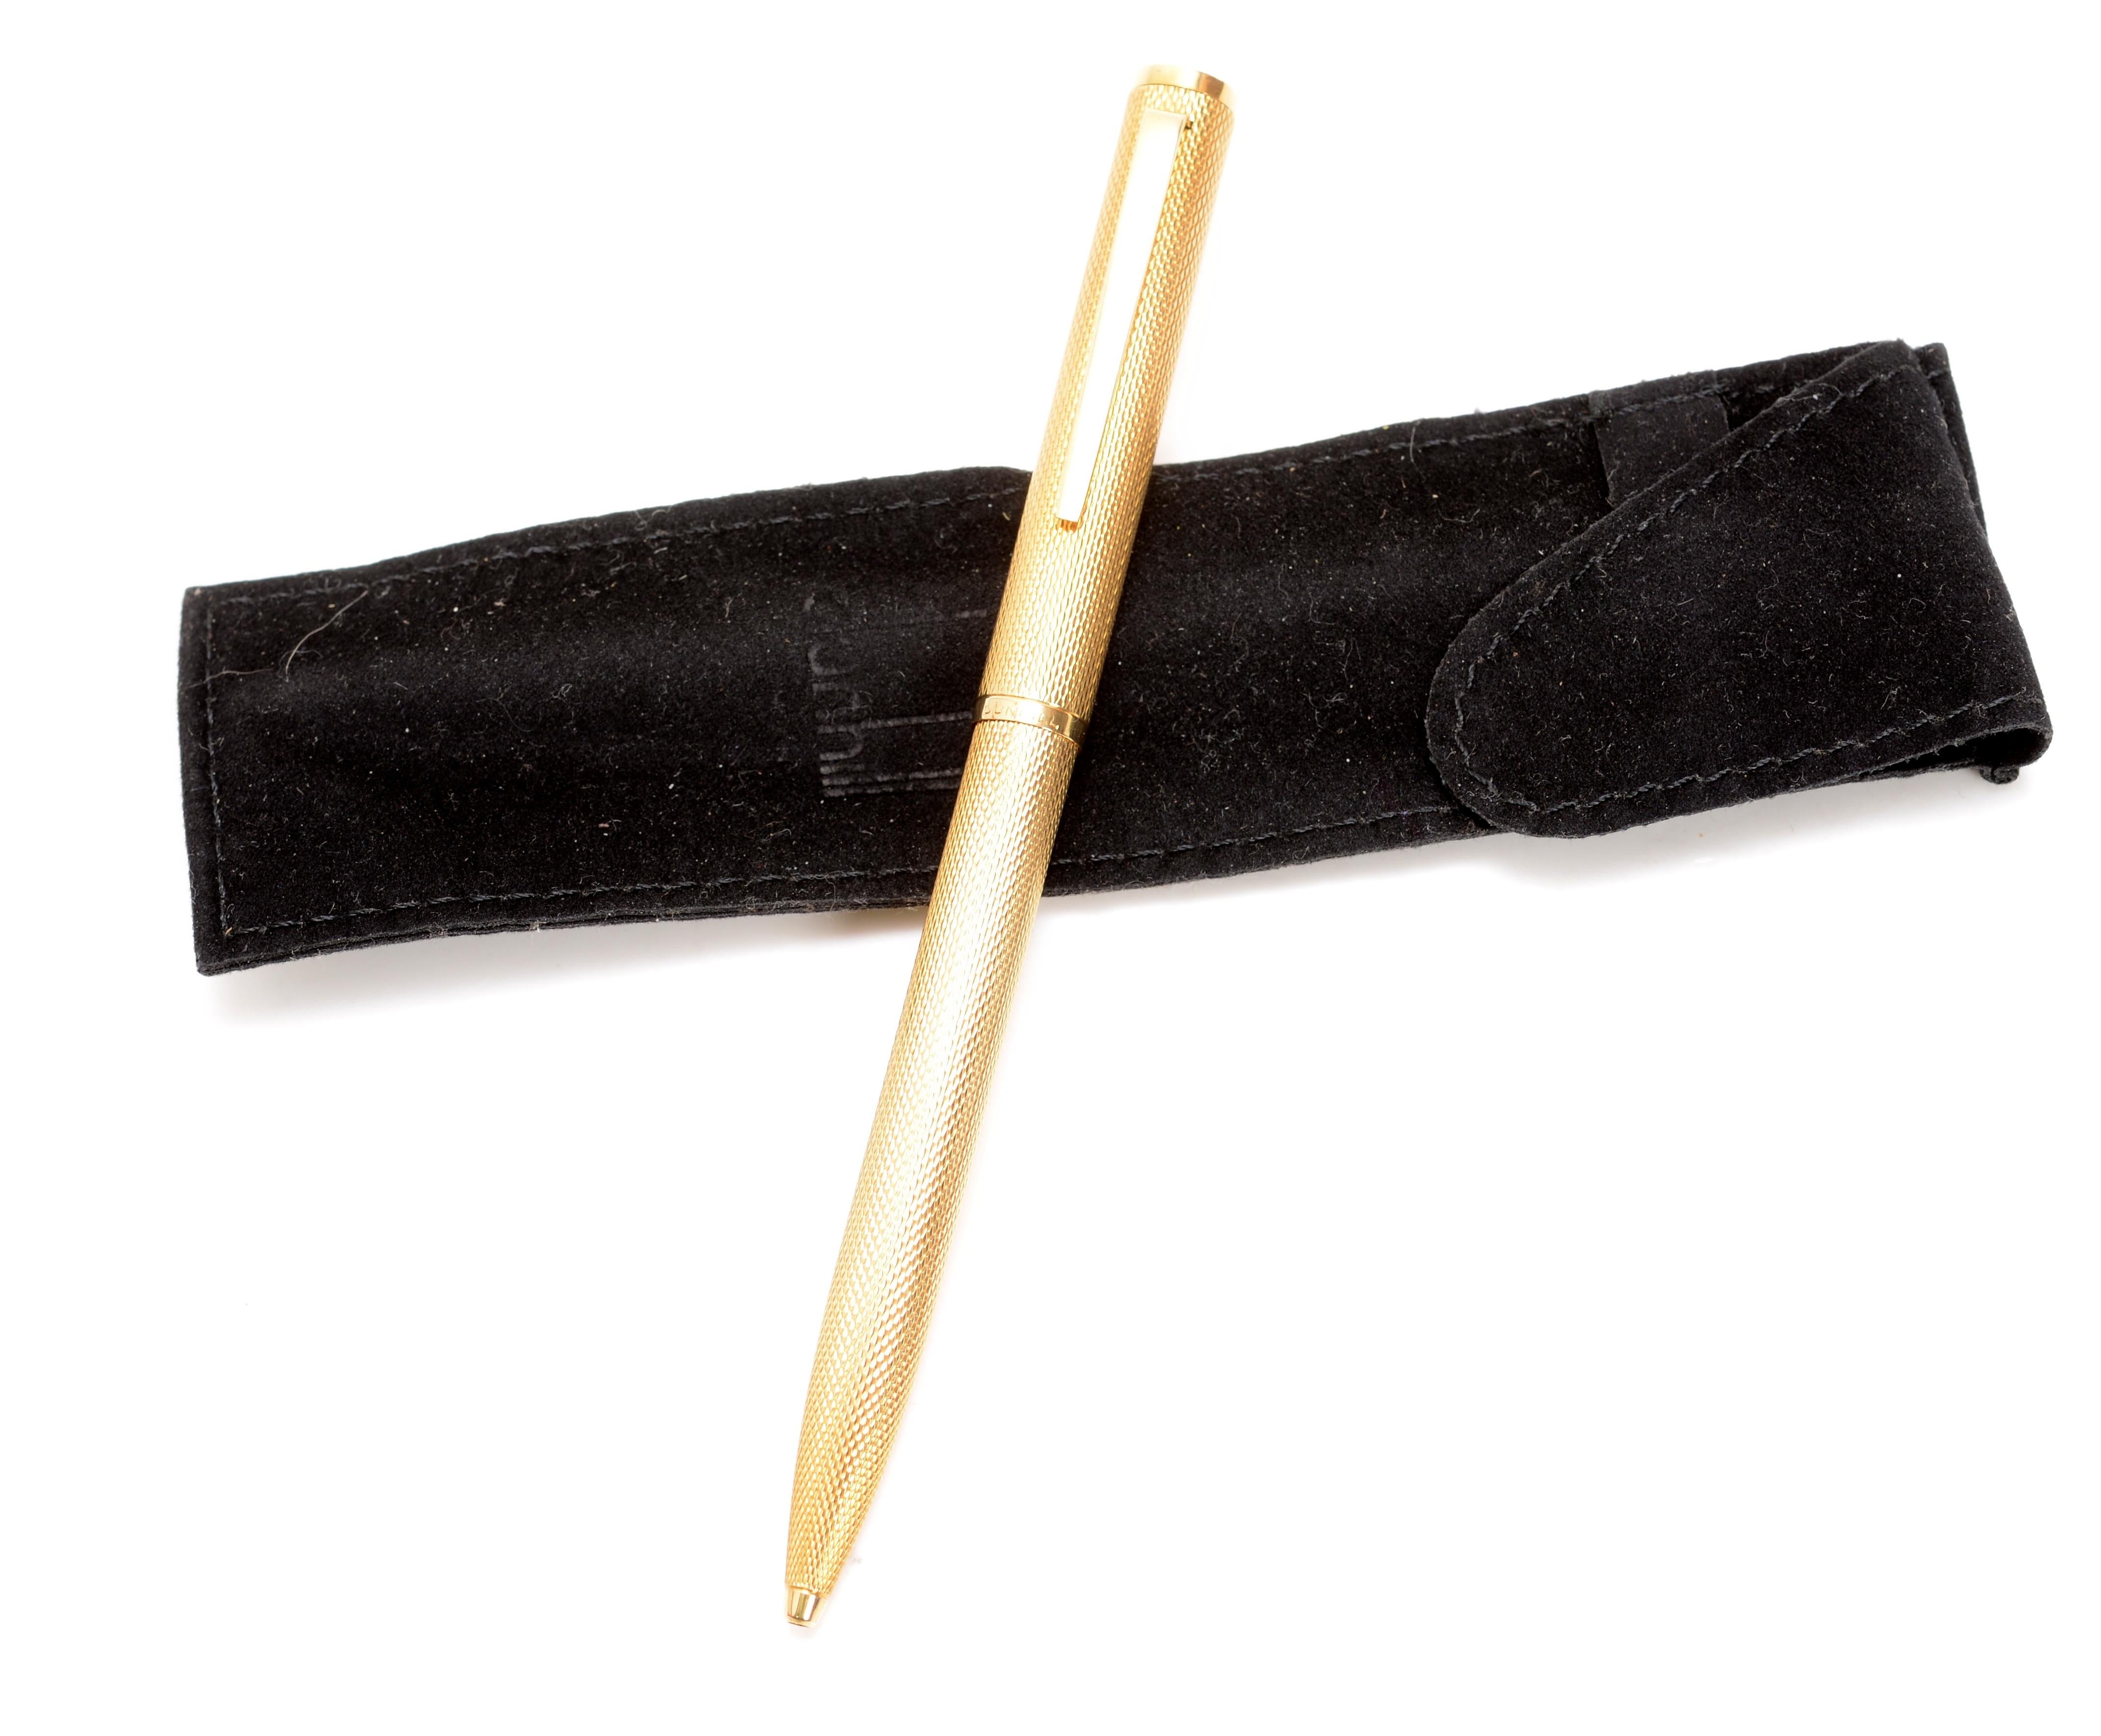 Solid 18kt Yellow Gold Dunhill Ballpoint Pen, with a rich patina. This was special order, and is important and rare in solid 18kt gold. The pen's engraving is the classic barley corn decoration. Very few of these pens were made in France. Both of